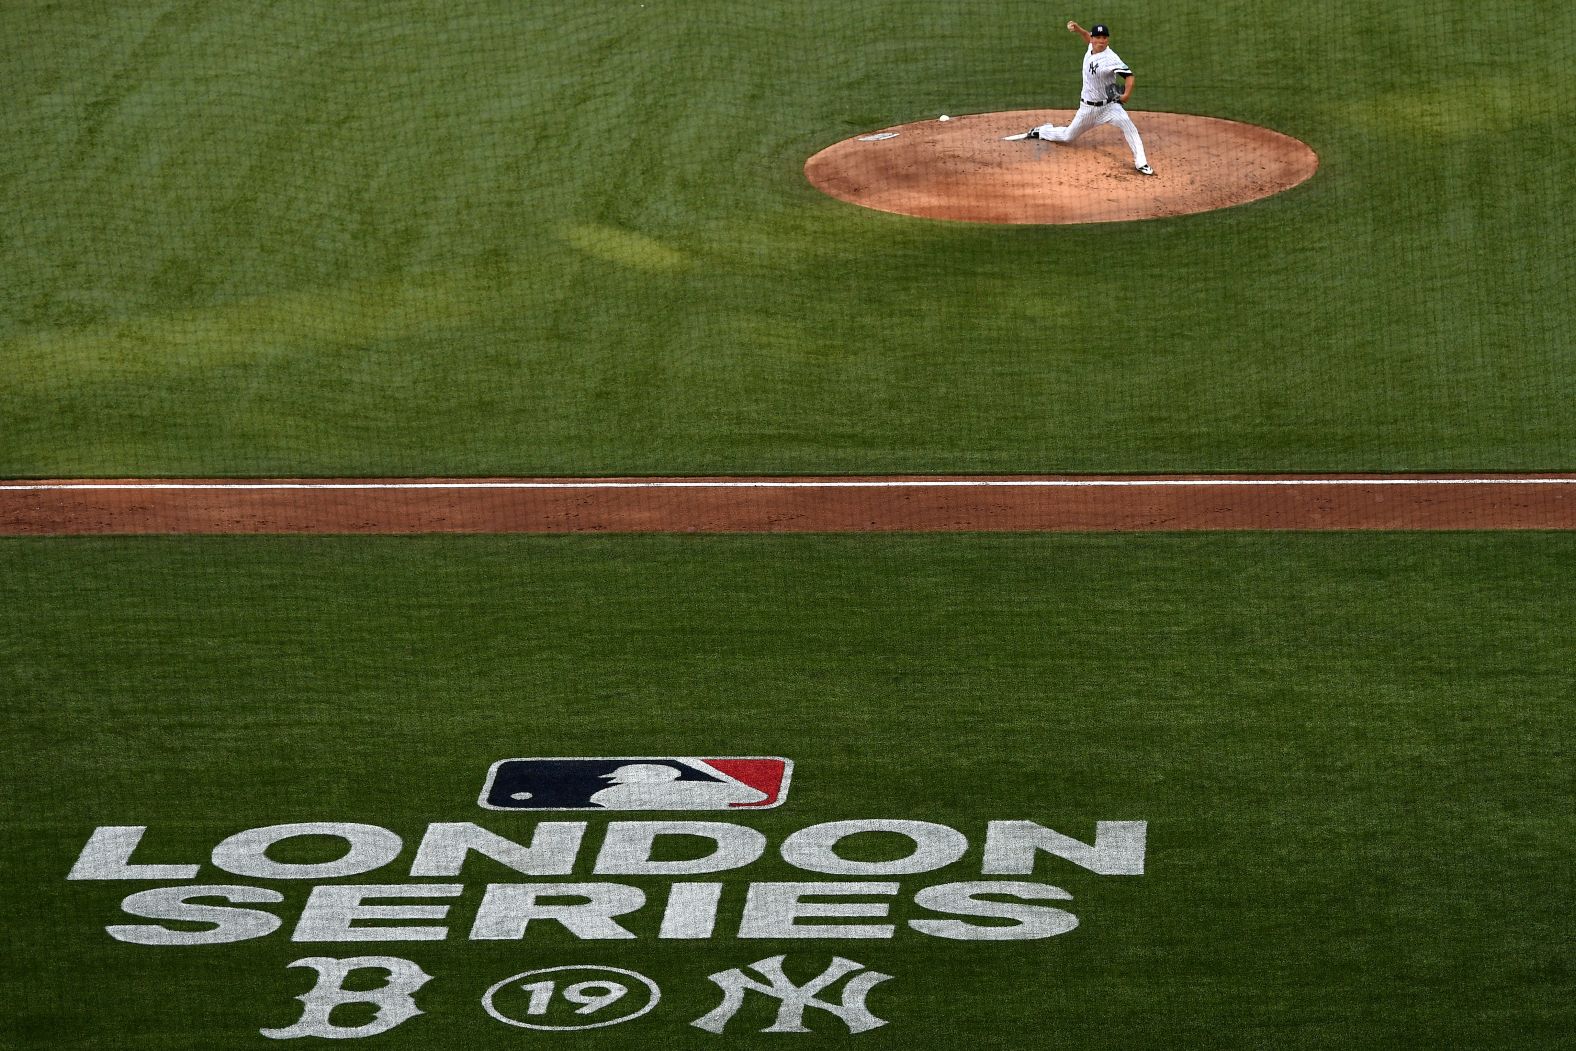 Masahiro Tanaka of the New York Yankees delivers a pitch during game one of the MLB London Series.